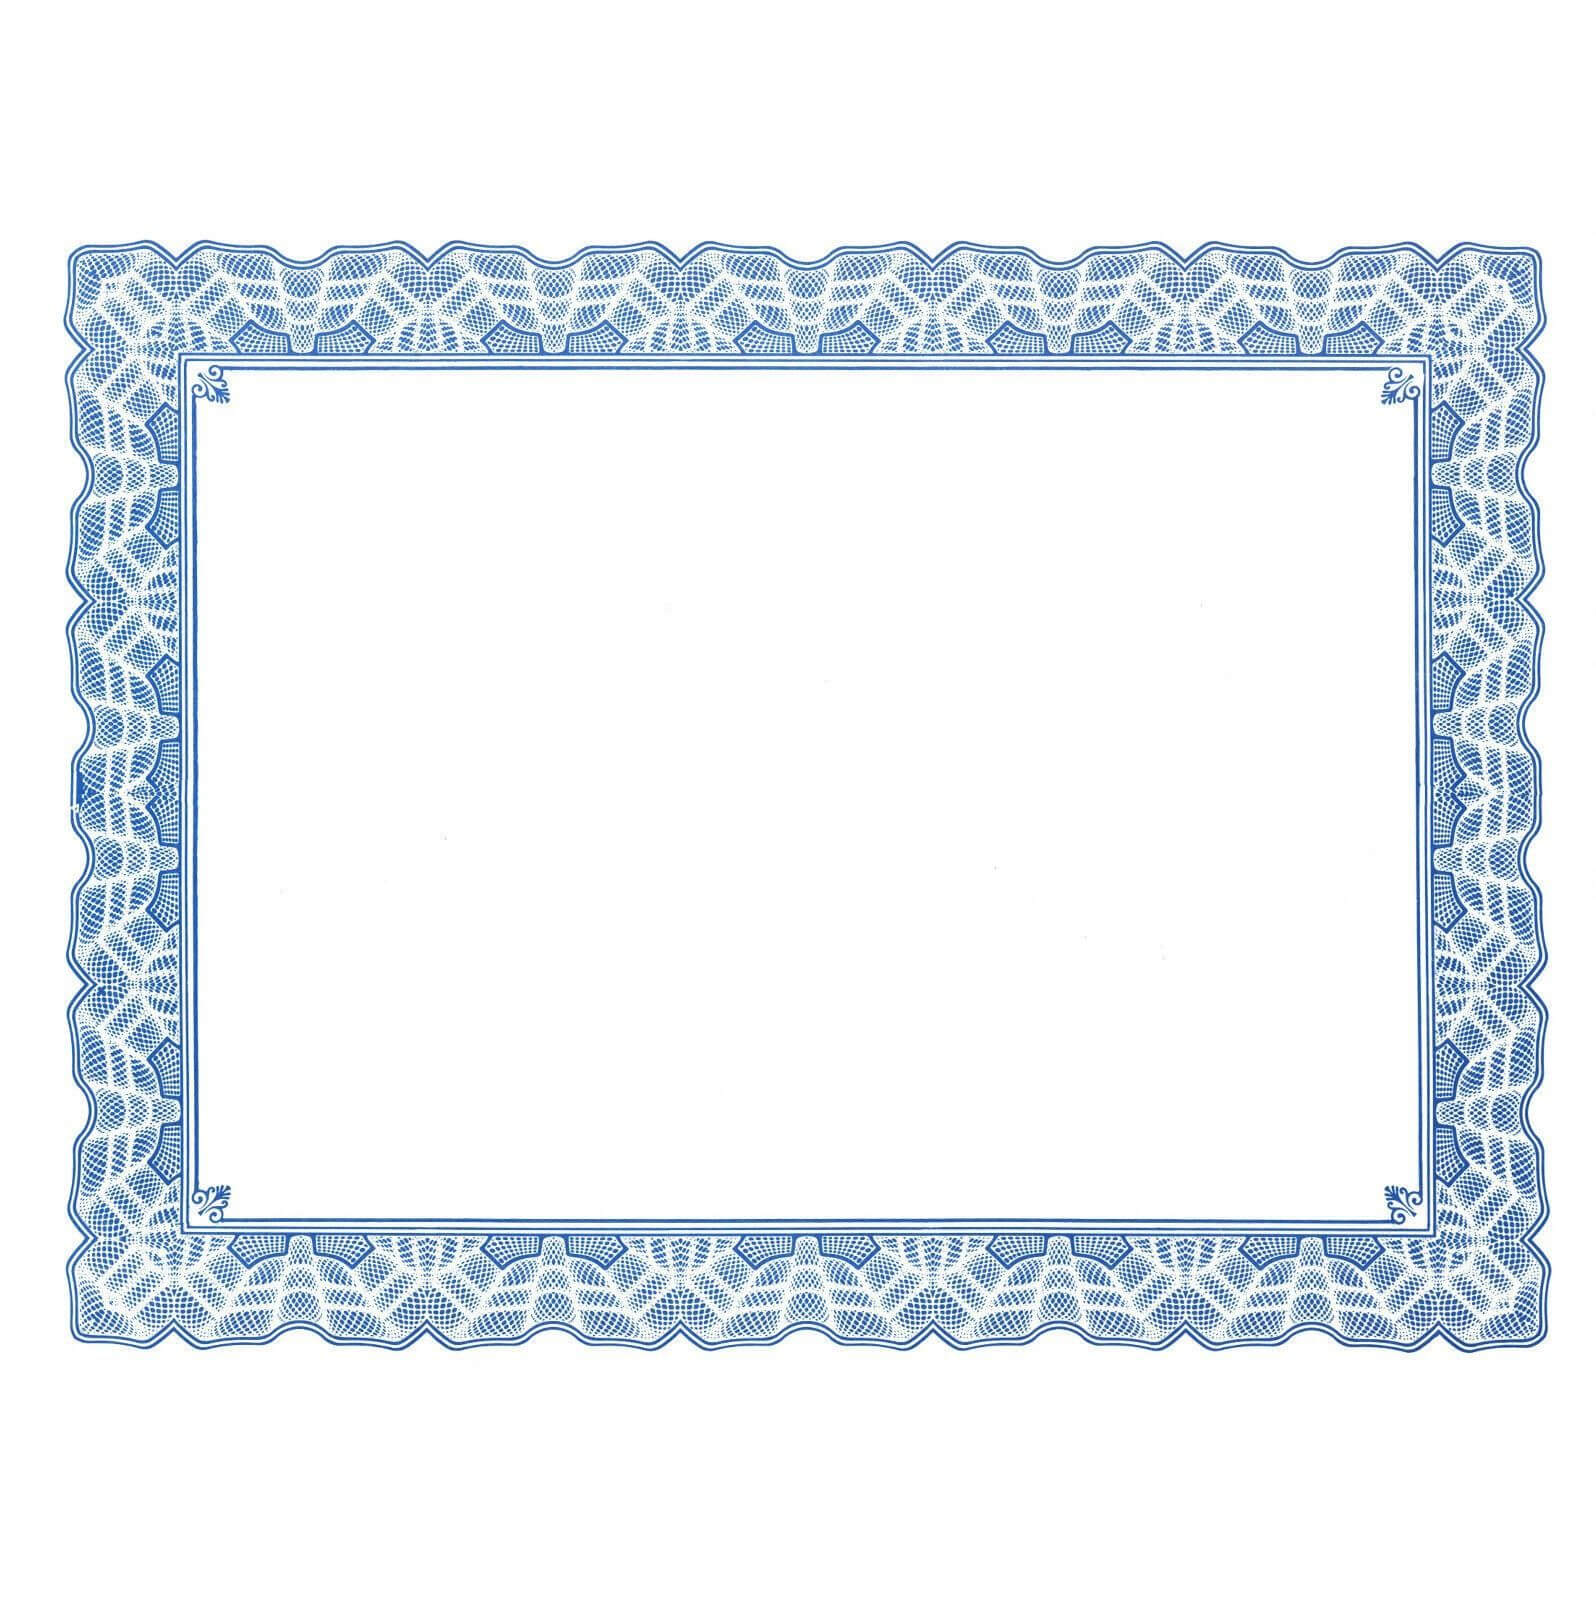 Certificate Border Templates For Word  | Certificate With Free Printable Certificate Border Templates